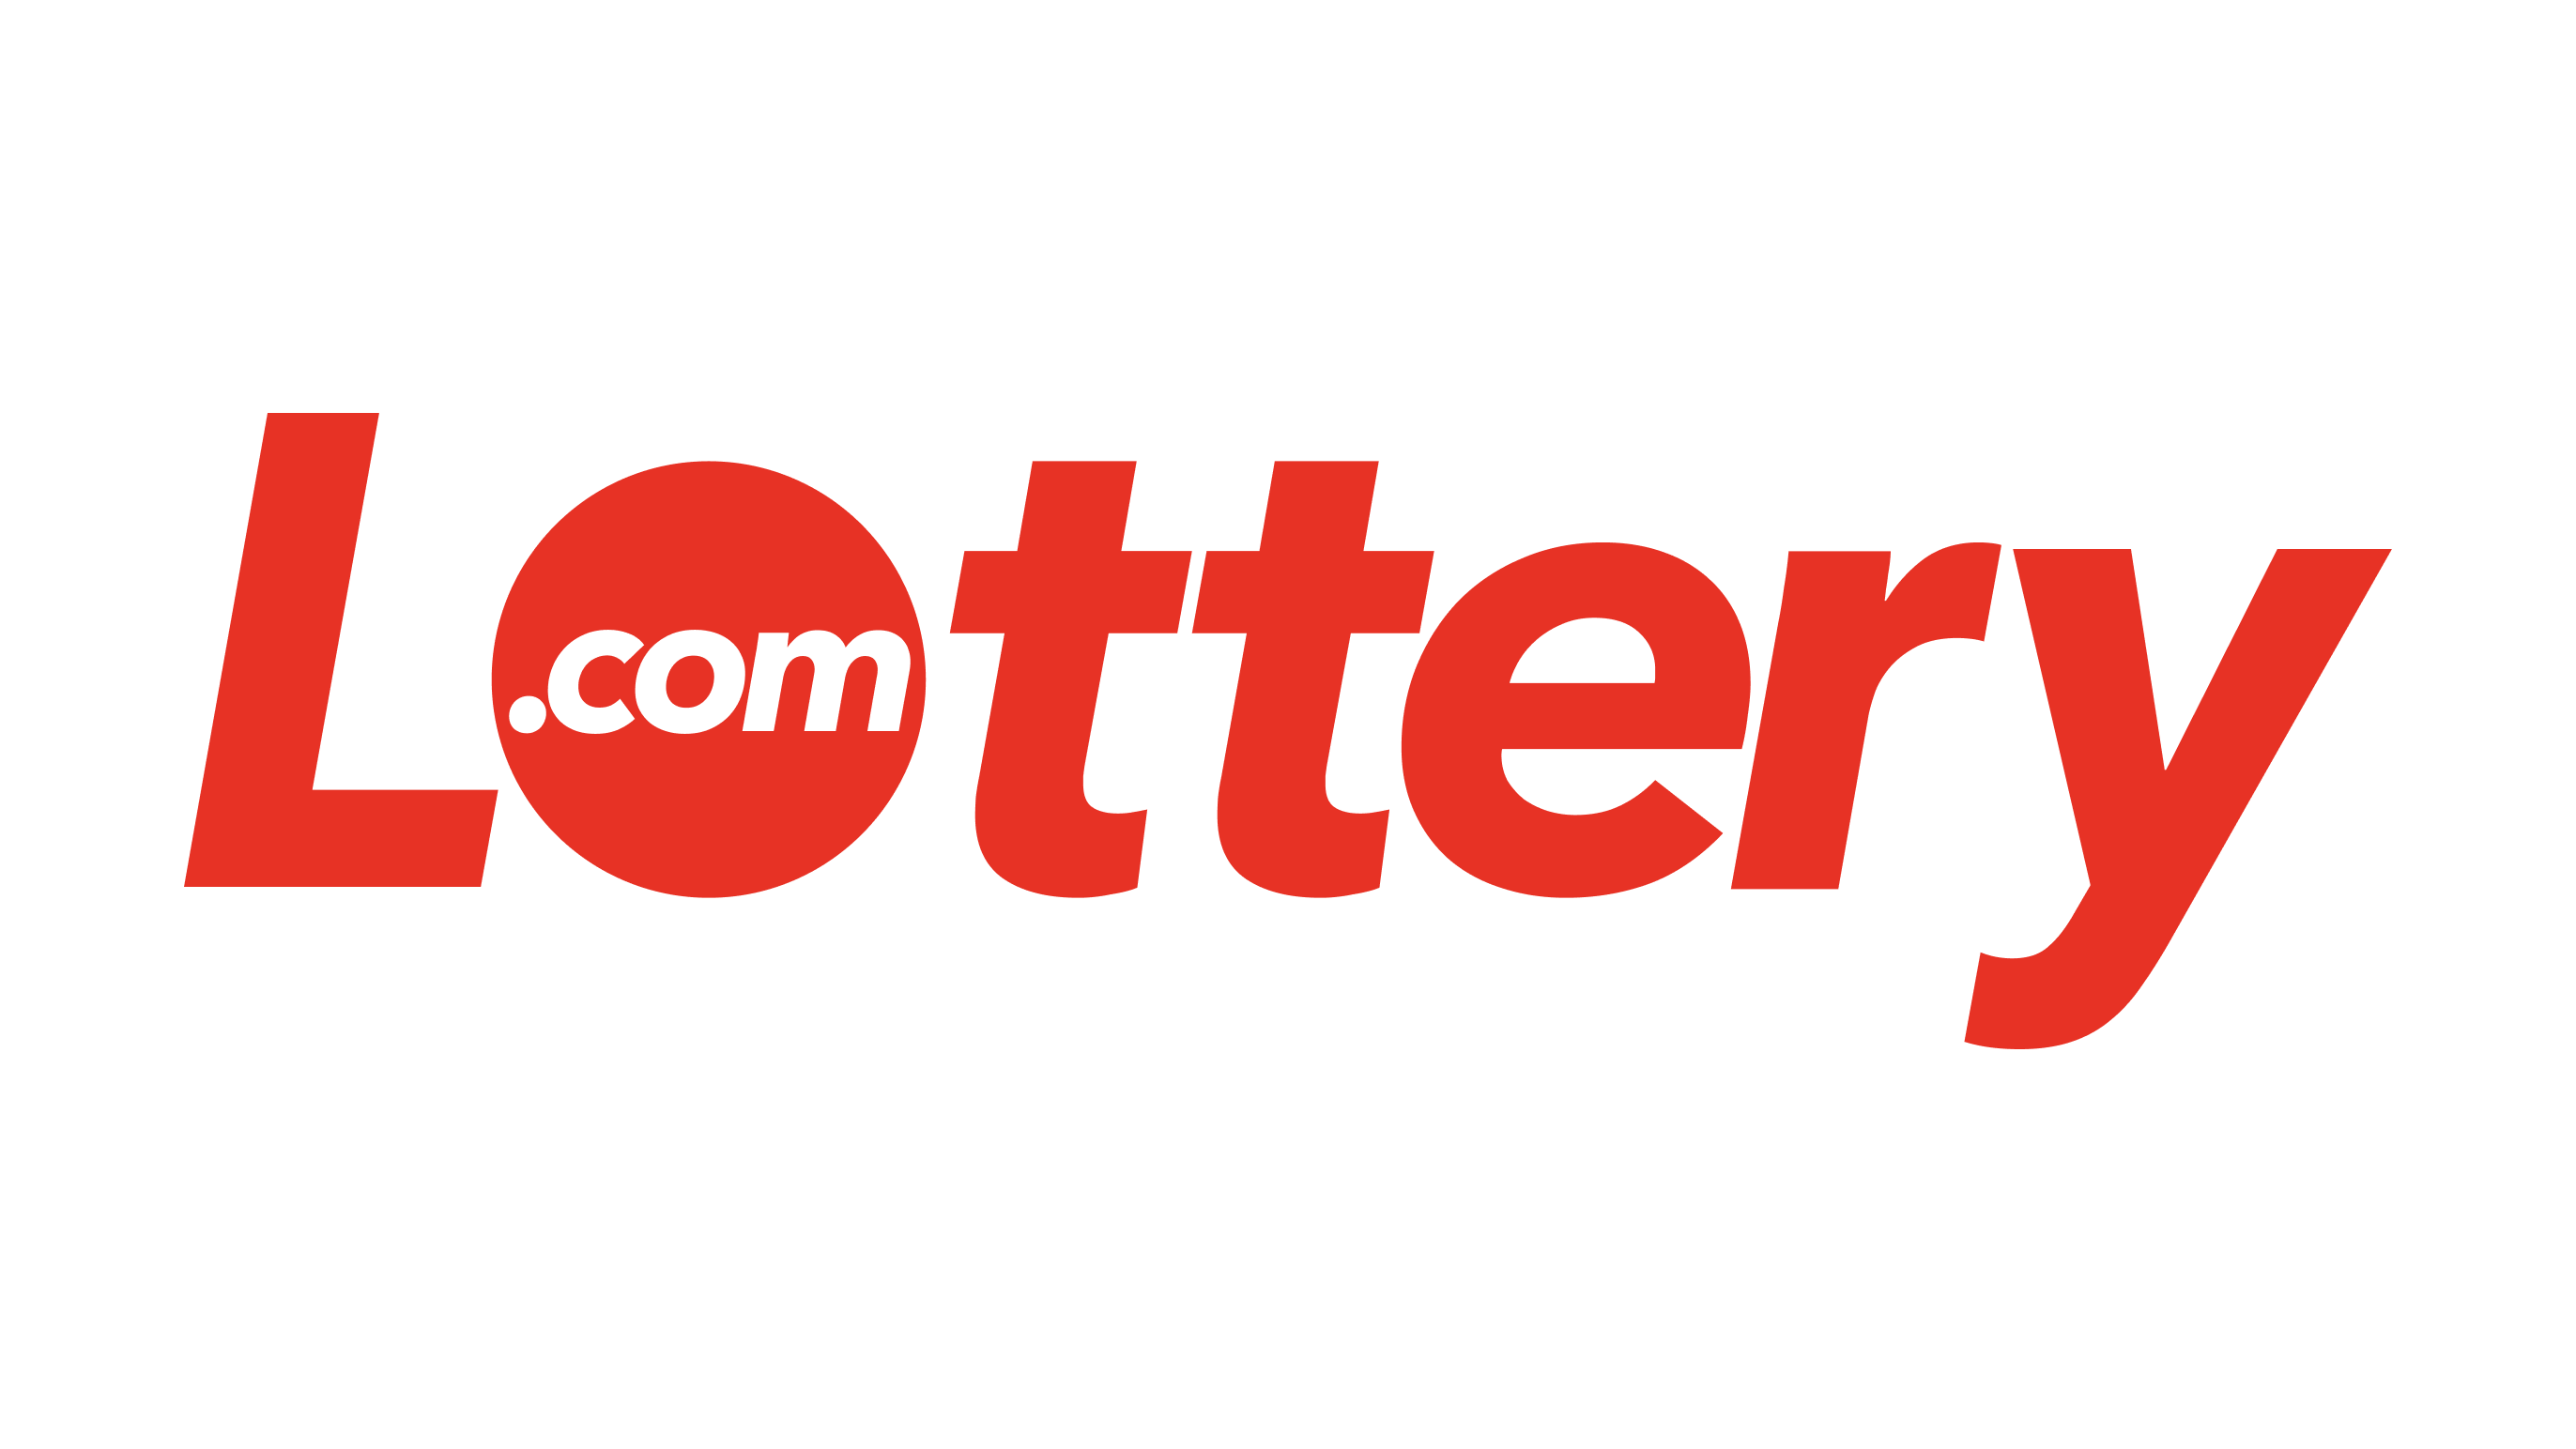 lottery.com-announces-appointment-of-new-strategic-financial-adviser-to-accelerate-and-expand-global-reach-and-acquisition-strategy